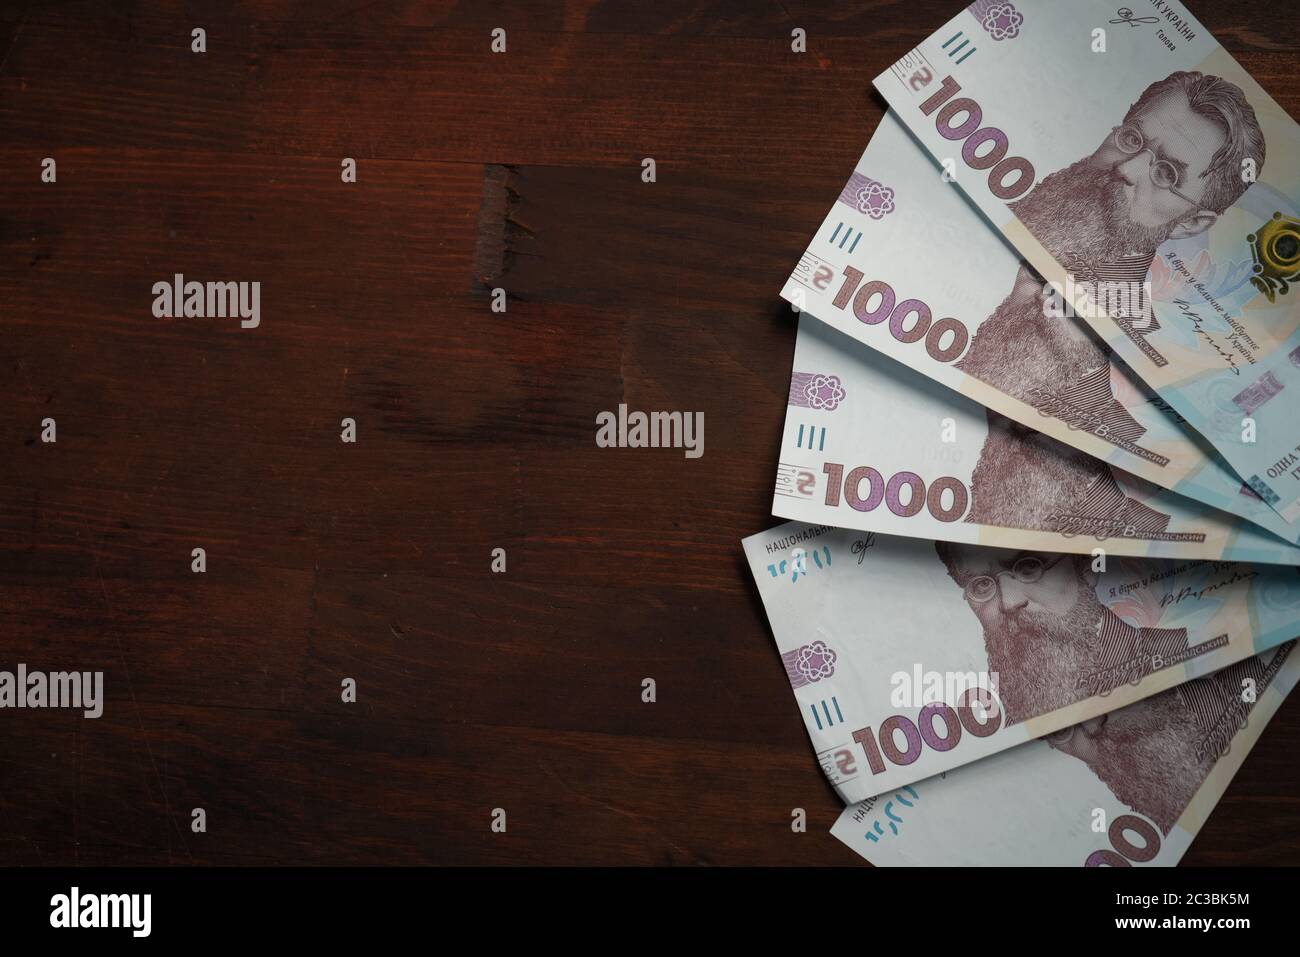 Fun from new Ukrainian banknotes face value 1000 hryvnia. Paper money on wooden background with copy cpace or textspace at left side. Close up shot Stock Photo